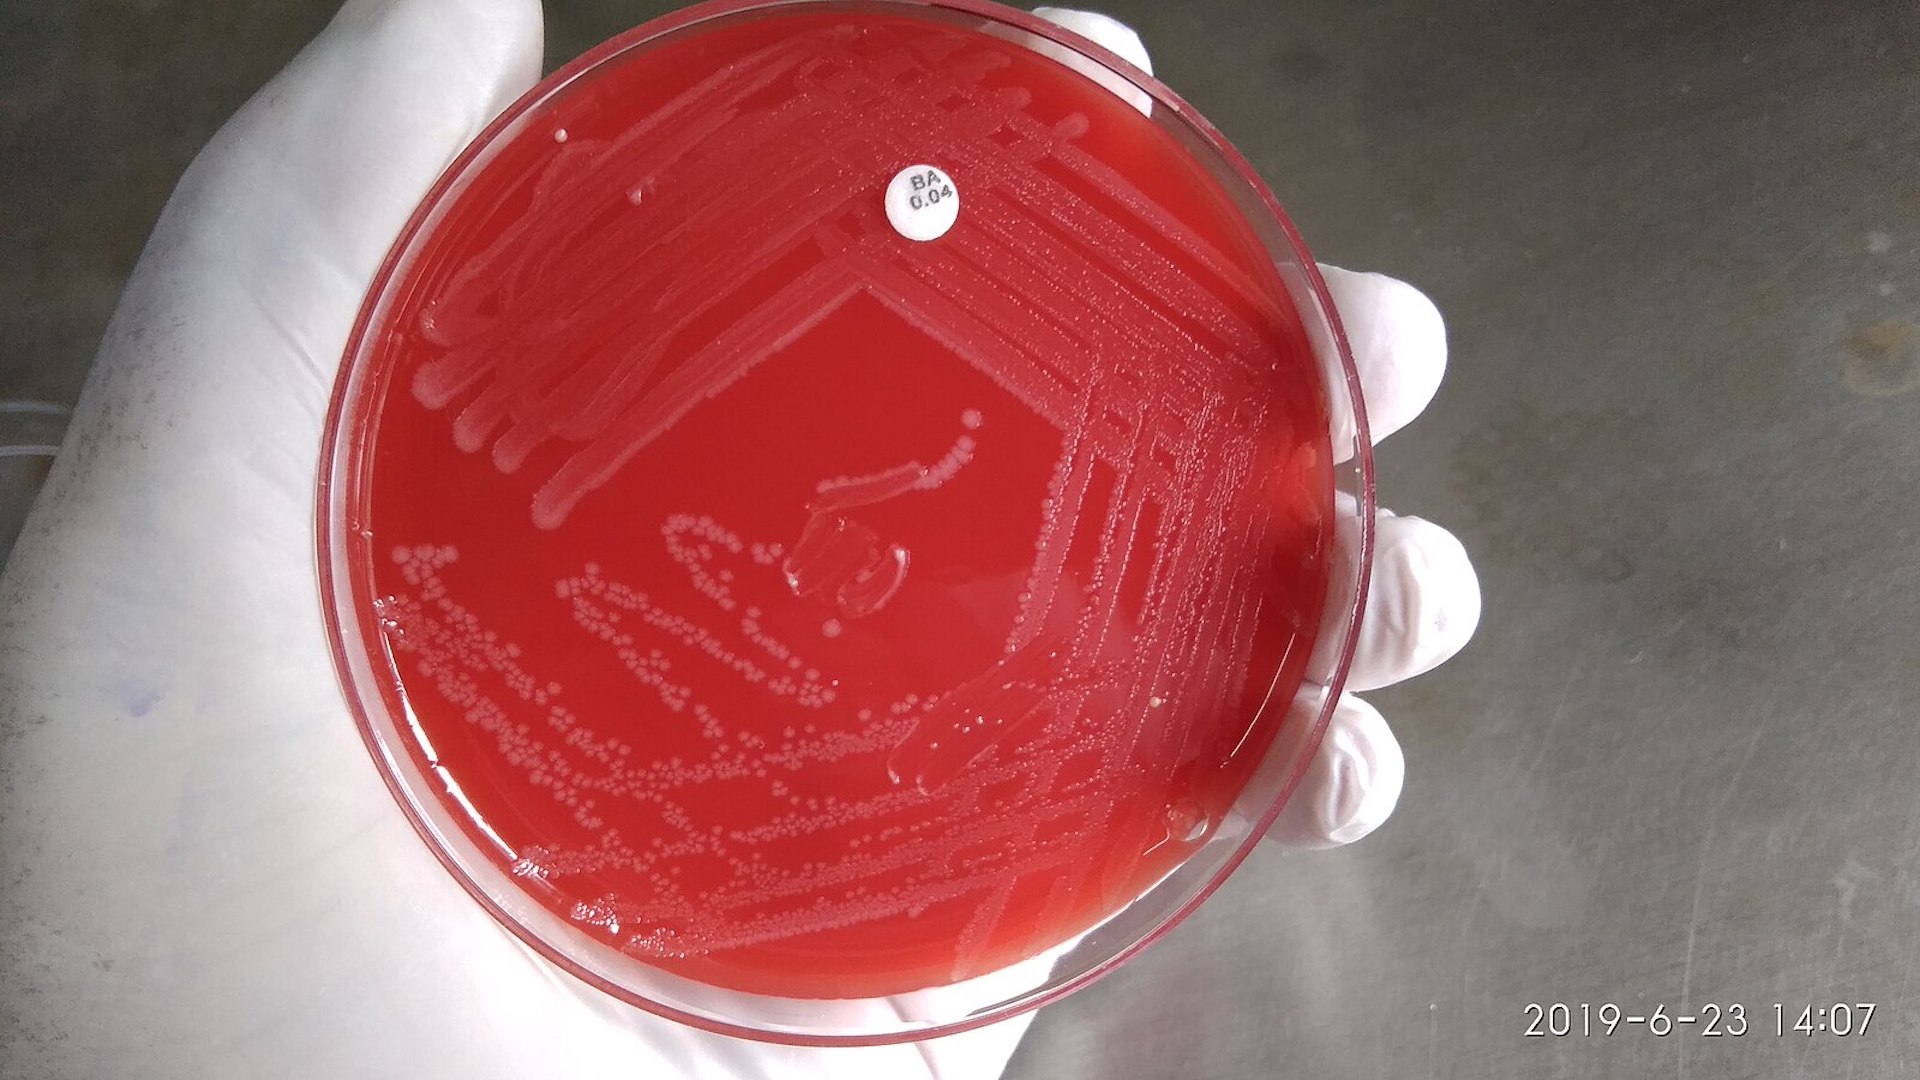 A gloved hand holds a circular petri dish with visible bacterial colonies